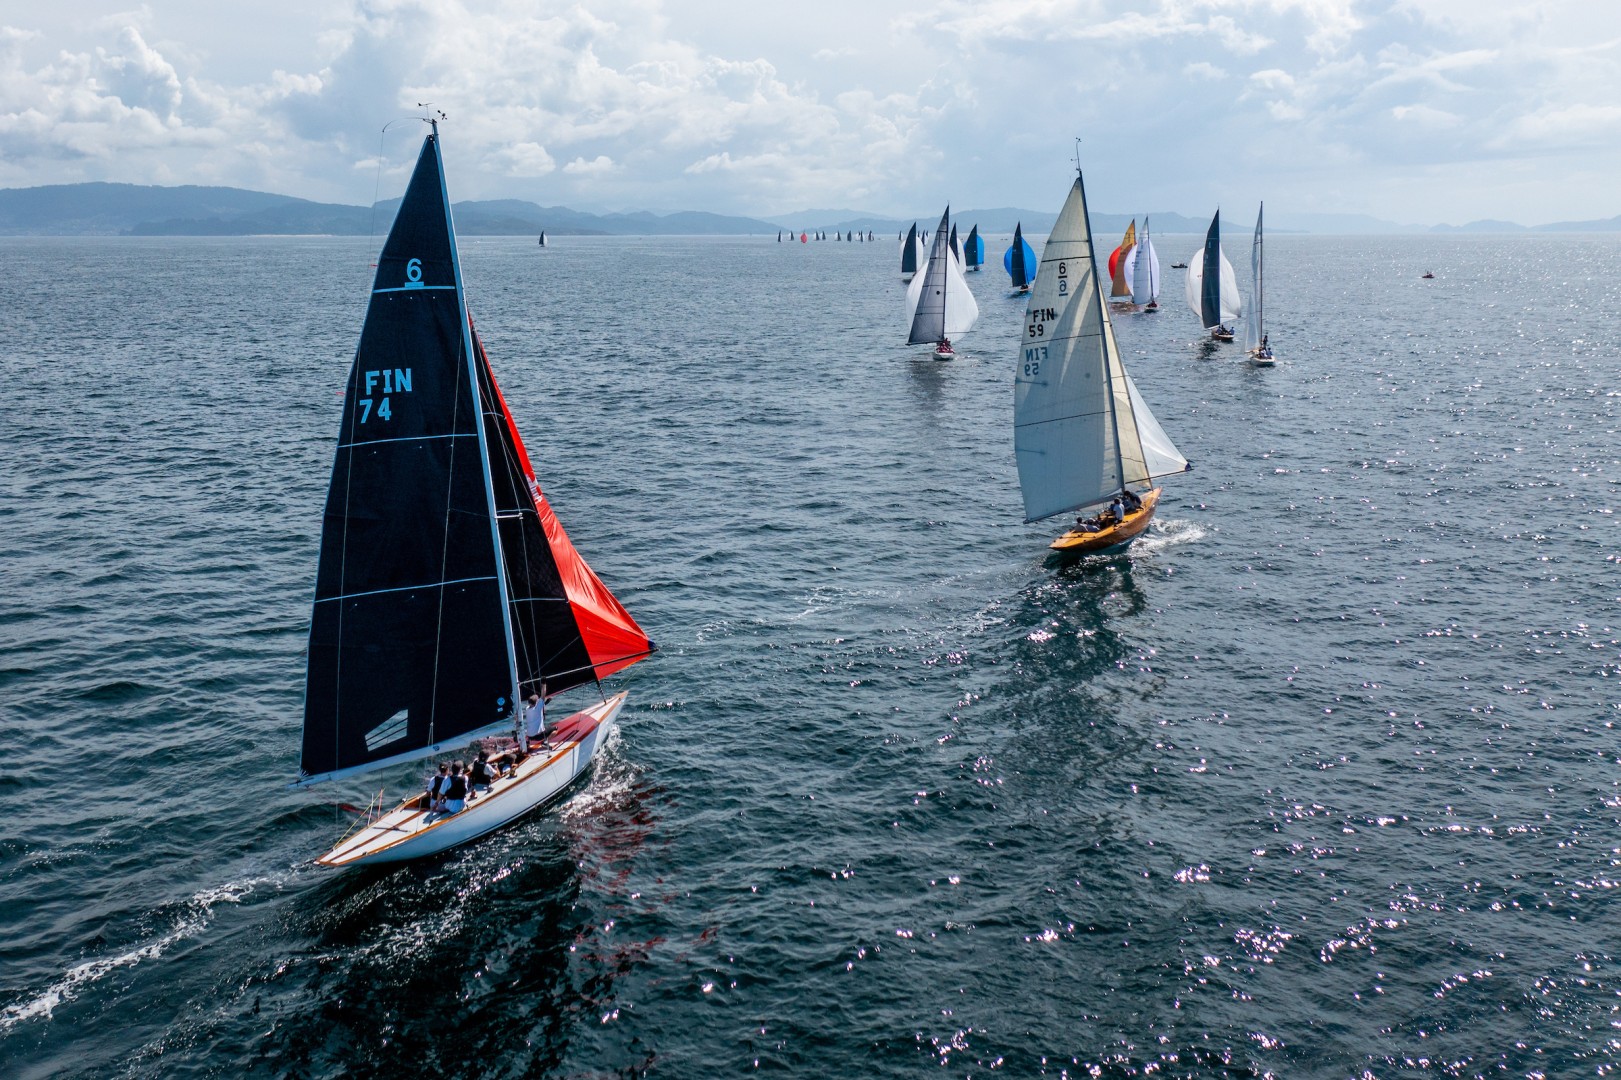 GBR entries strengthen in the 2022 Xacobeo 6mR Worlds